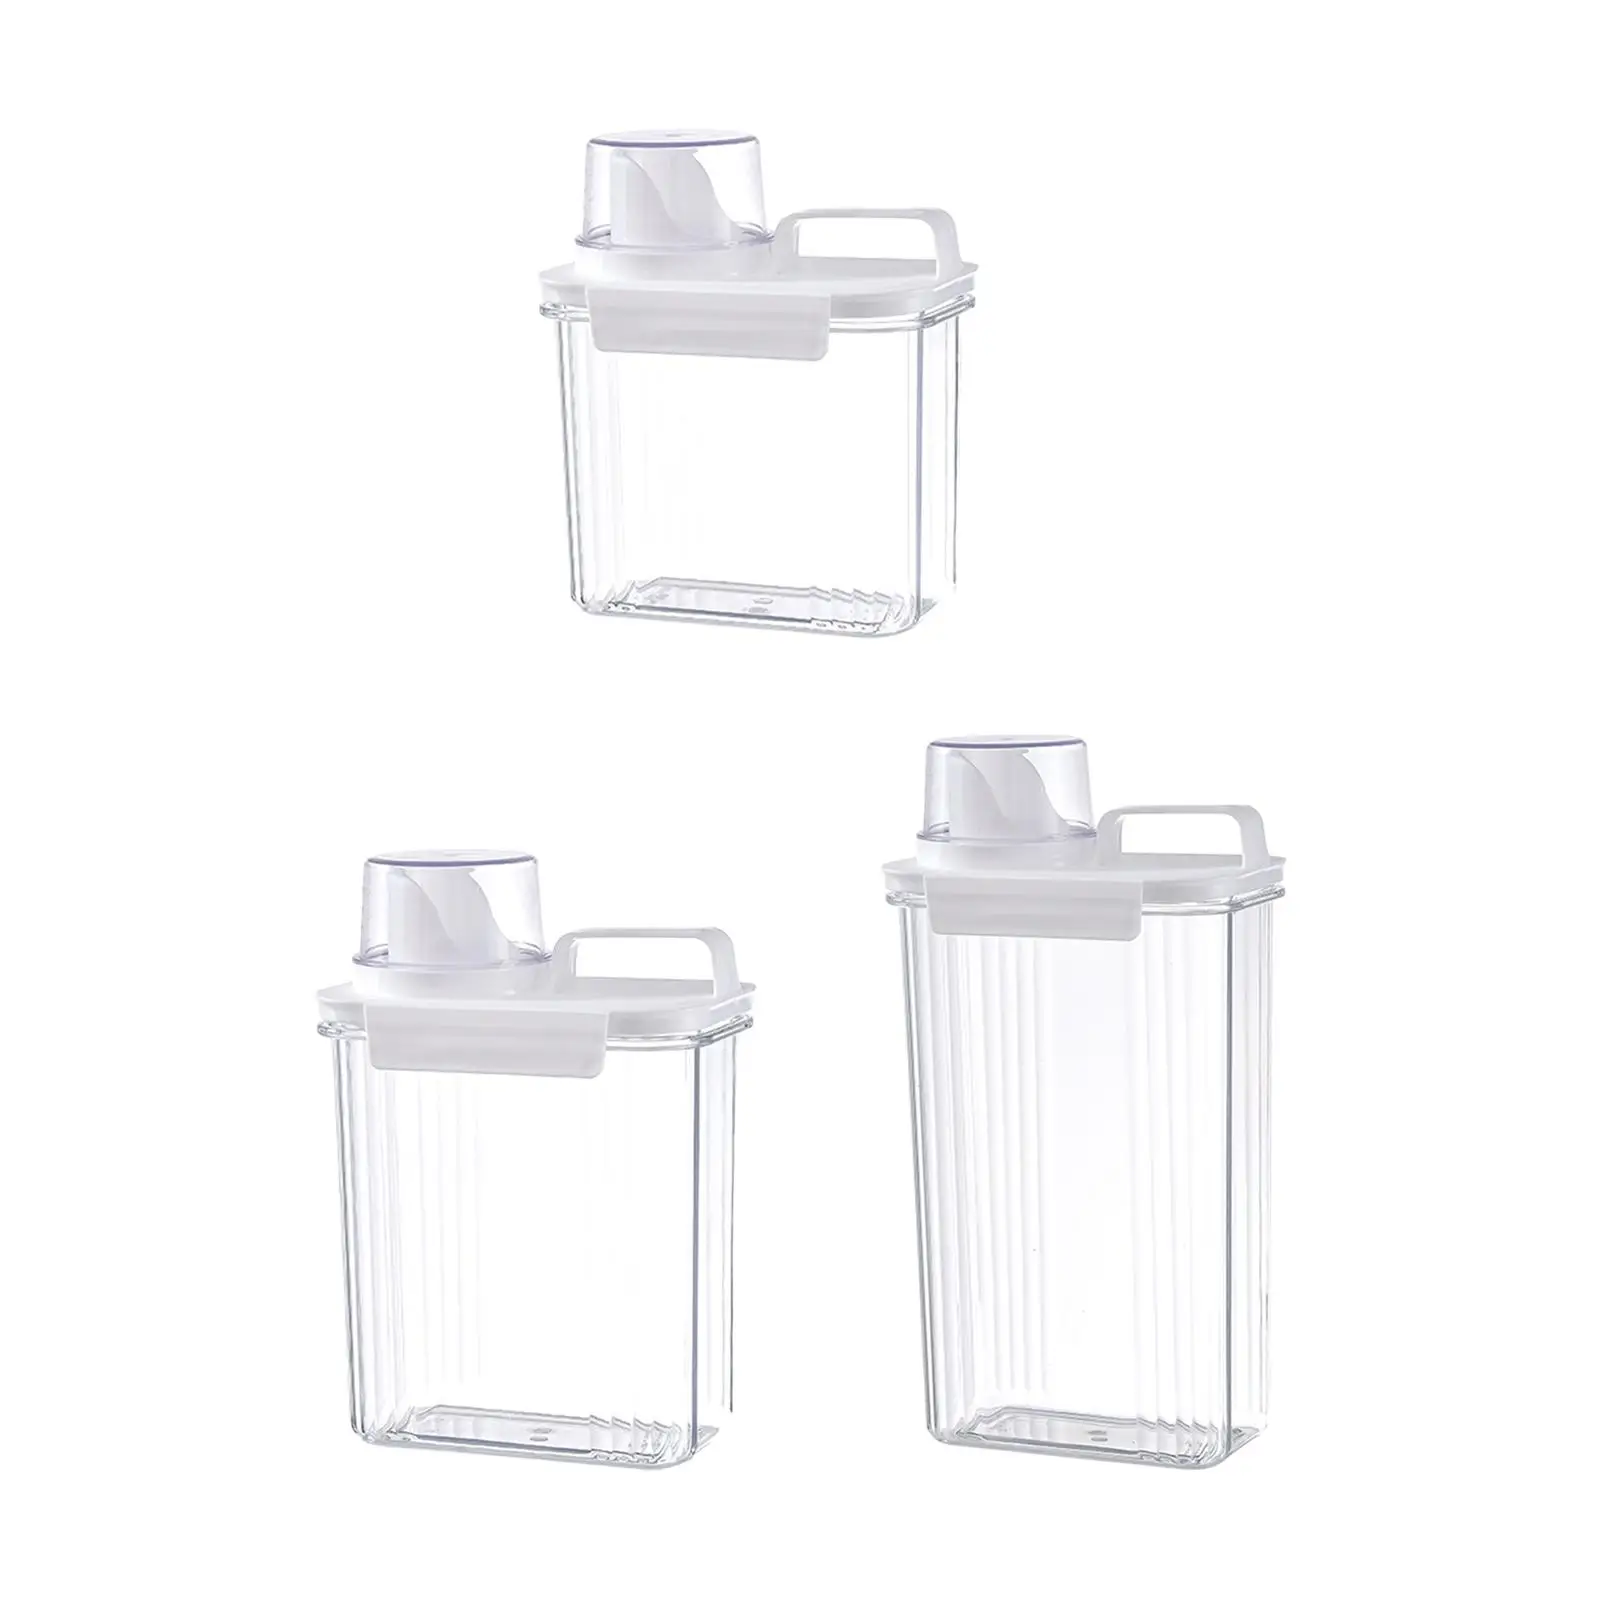 Laundry Powder Containers Multipurpose Clear Reusable Liquid Laundry Soap Dispenser for Kitchen Countertop Laundry Room Bathroom